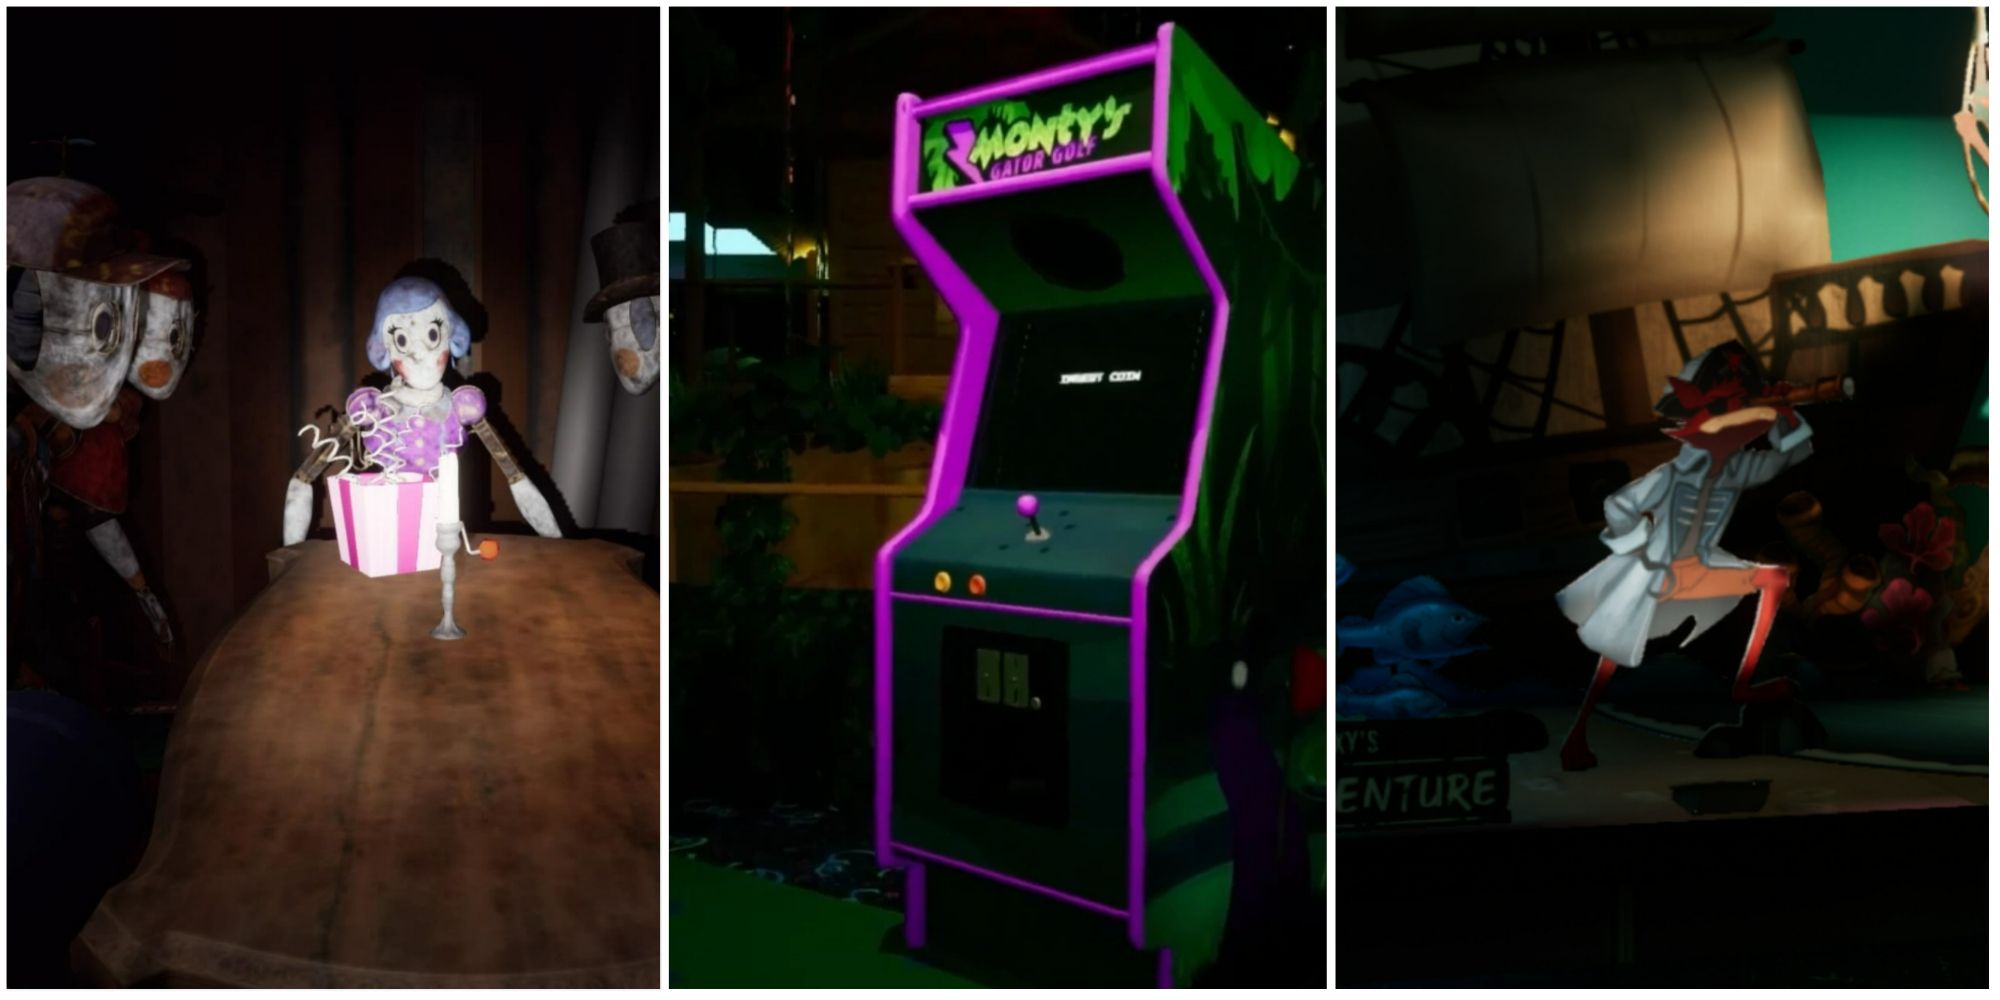 Three of the easter eggs of security breach including bots, an arcade machine, and cardboard cutouts